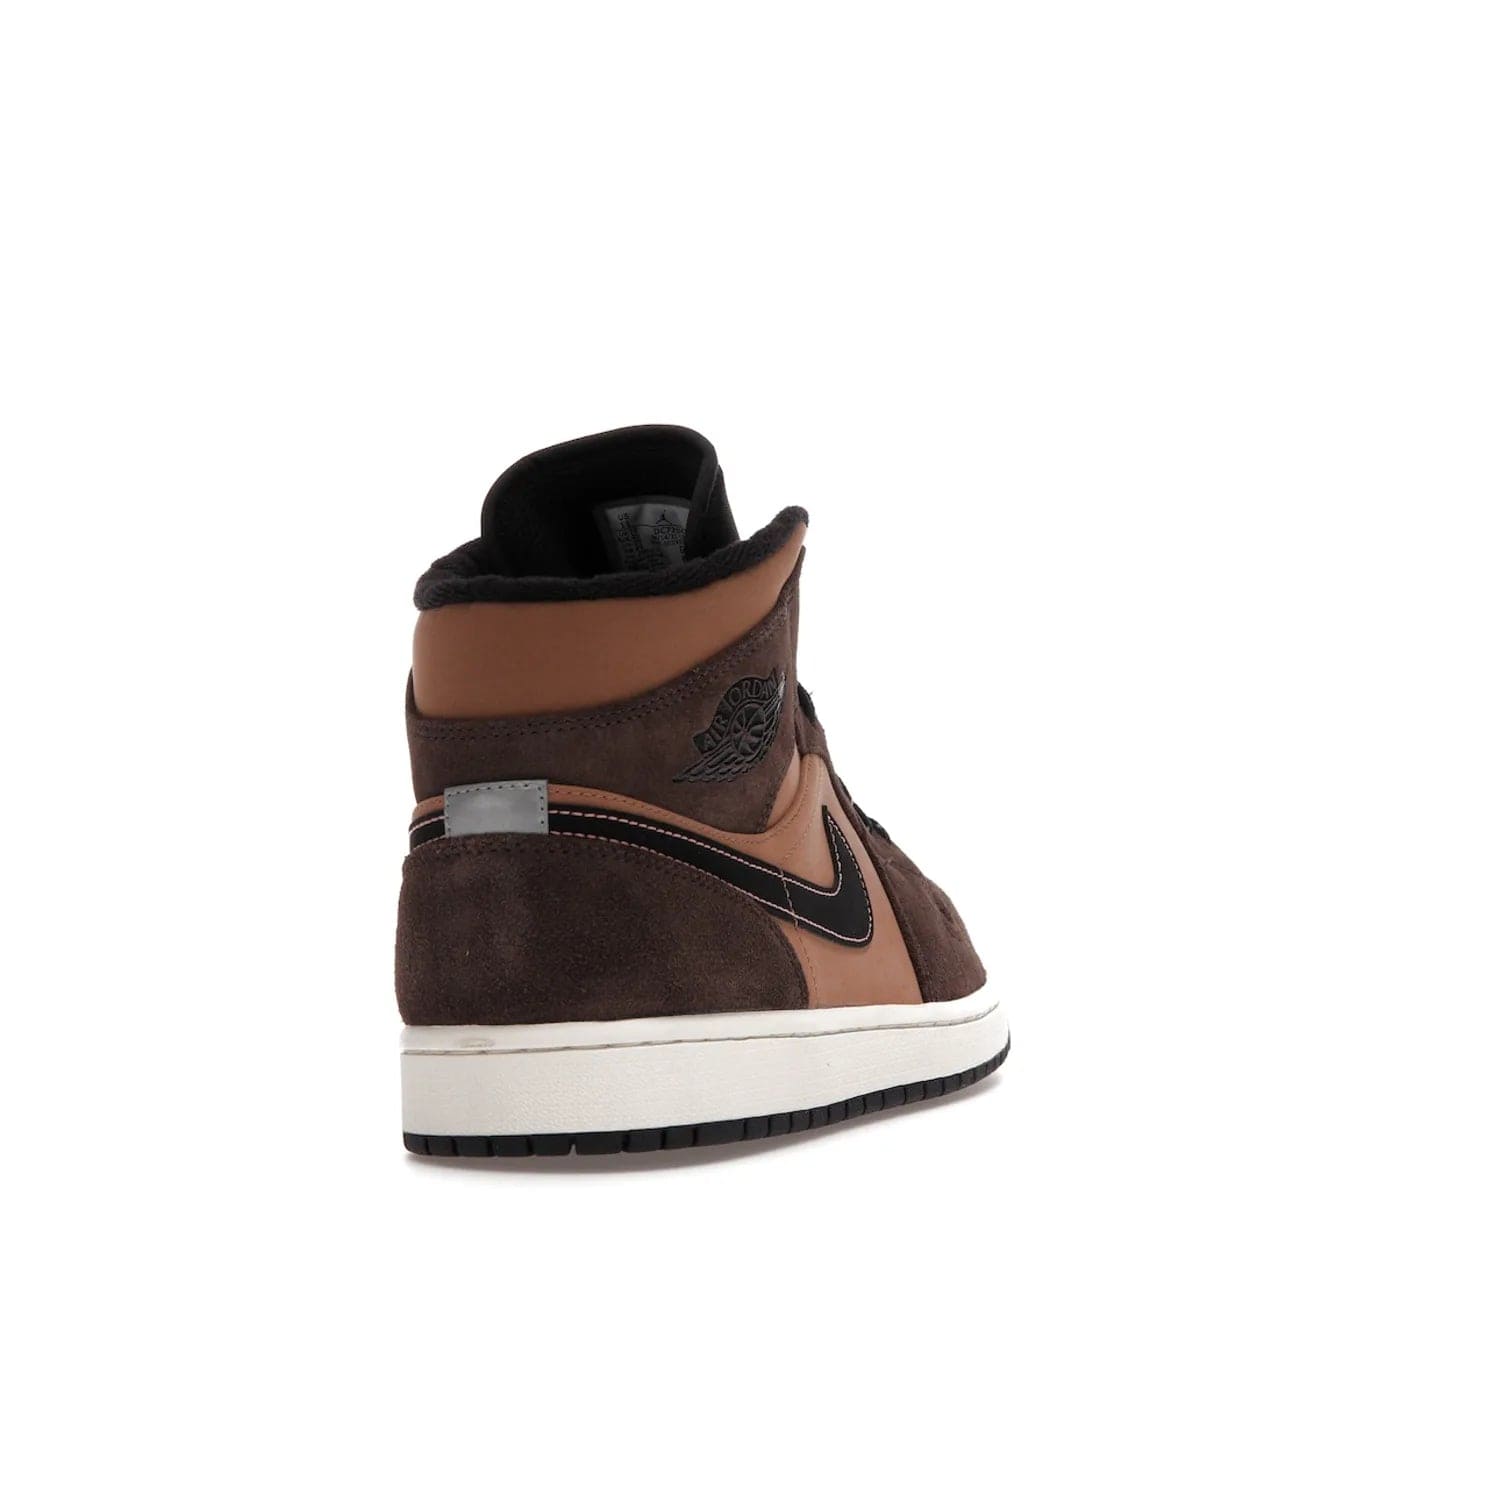 Jordan 1 Mid SE Dark Chocolate - Image 30 - Only at www.BallersClubKickz.com - This fashionable and functional Jordan 1 Mid SE Dark Chocolate features a light brown Durabuck upper, dark brown suede overlays, black Swoosh logos and reflective patch at heel. A must-have for any sneakerhead!